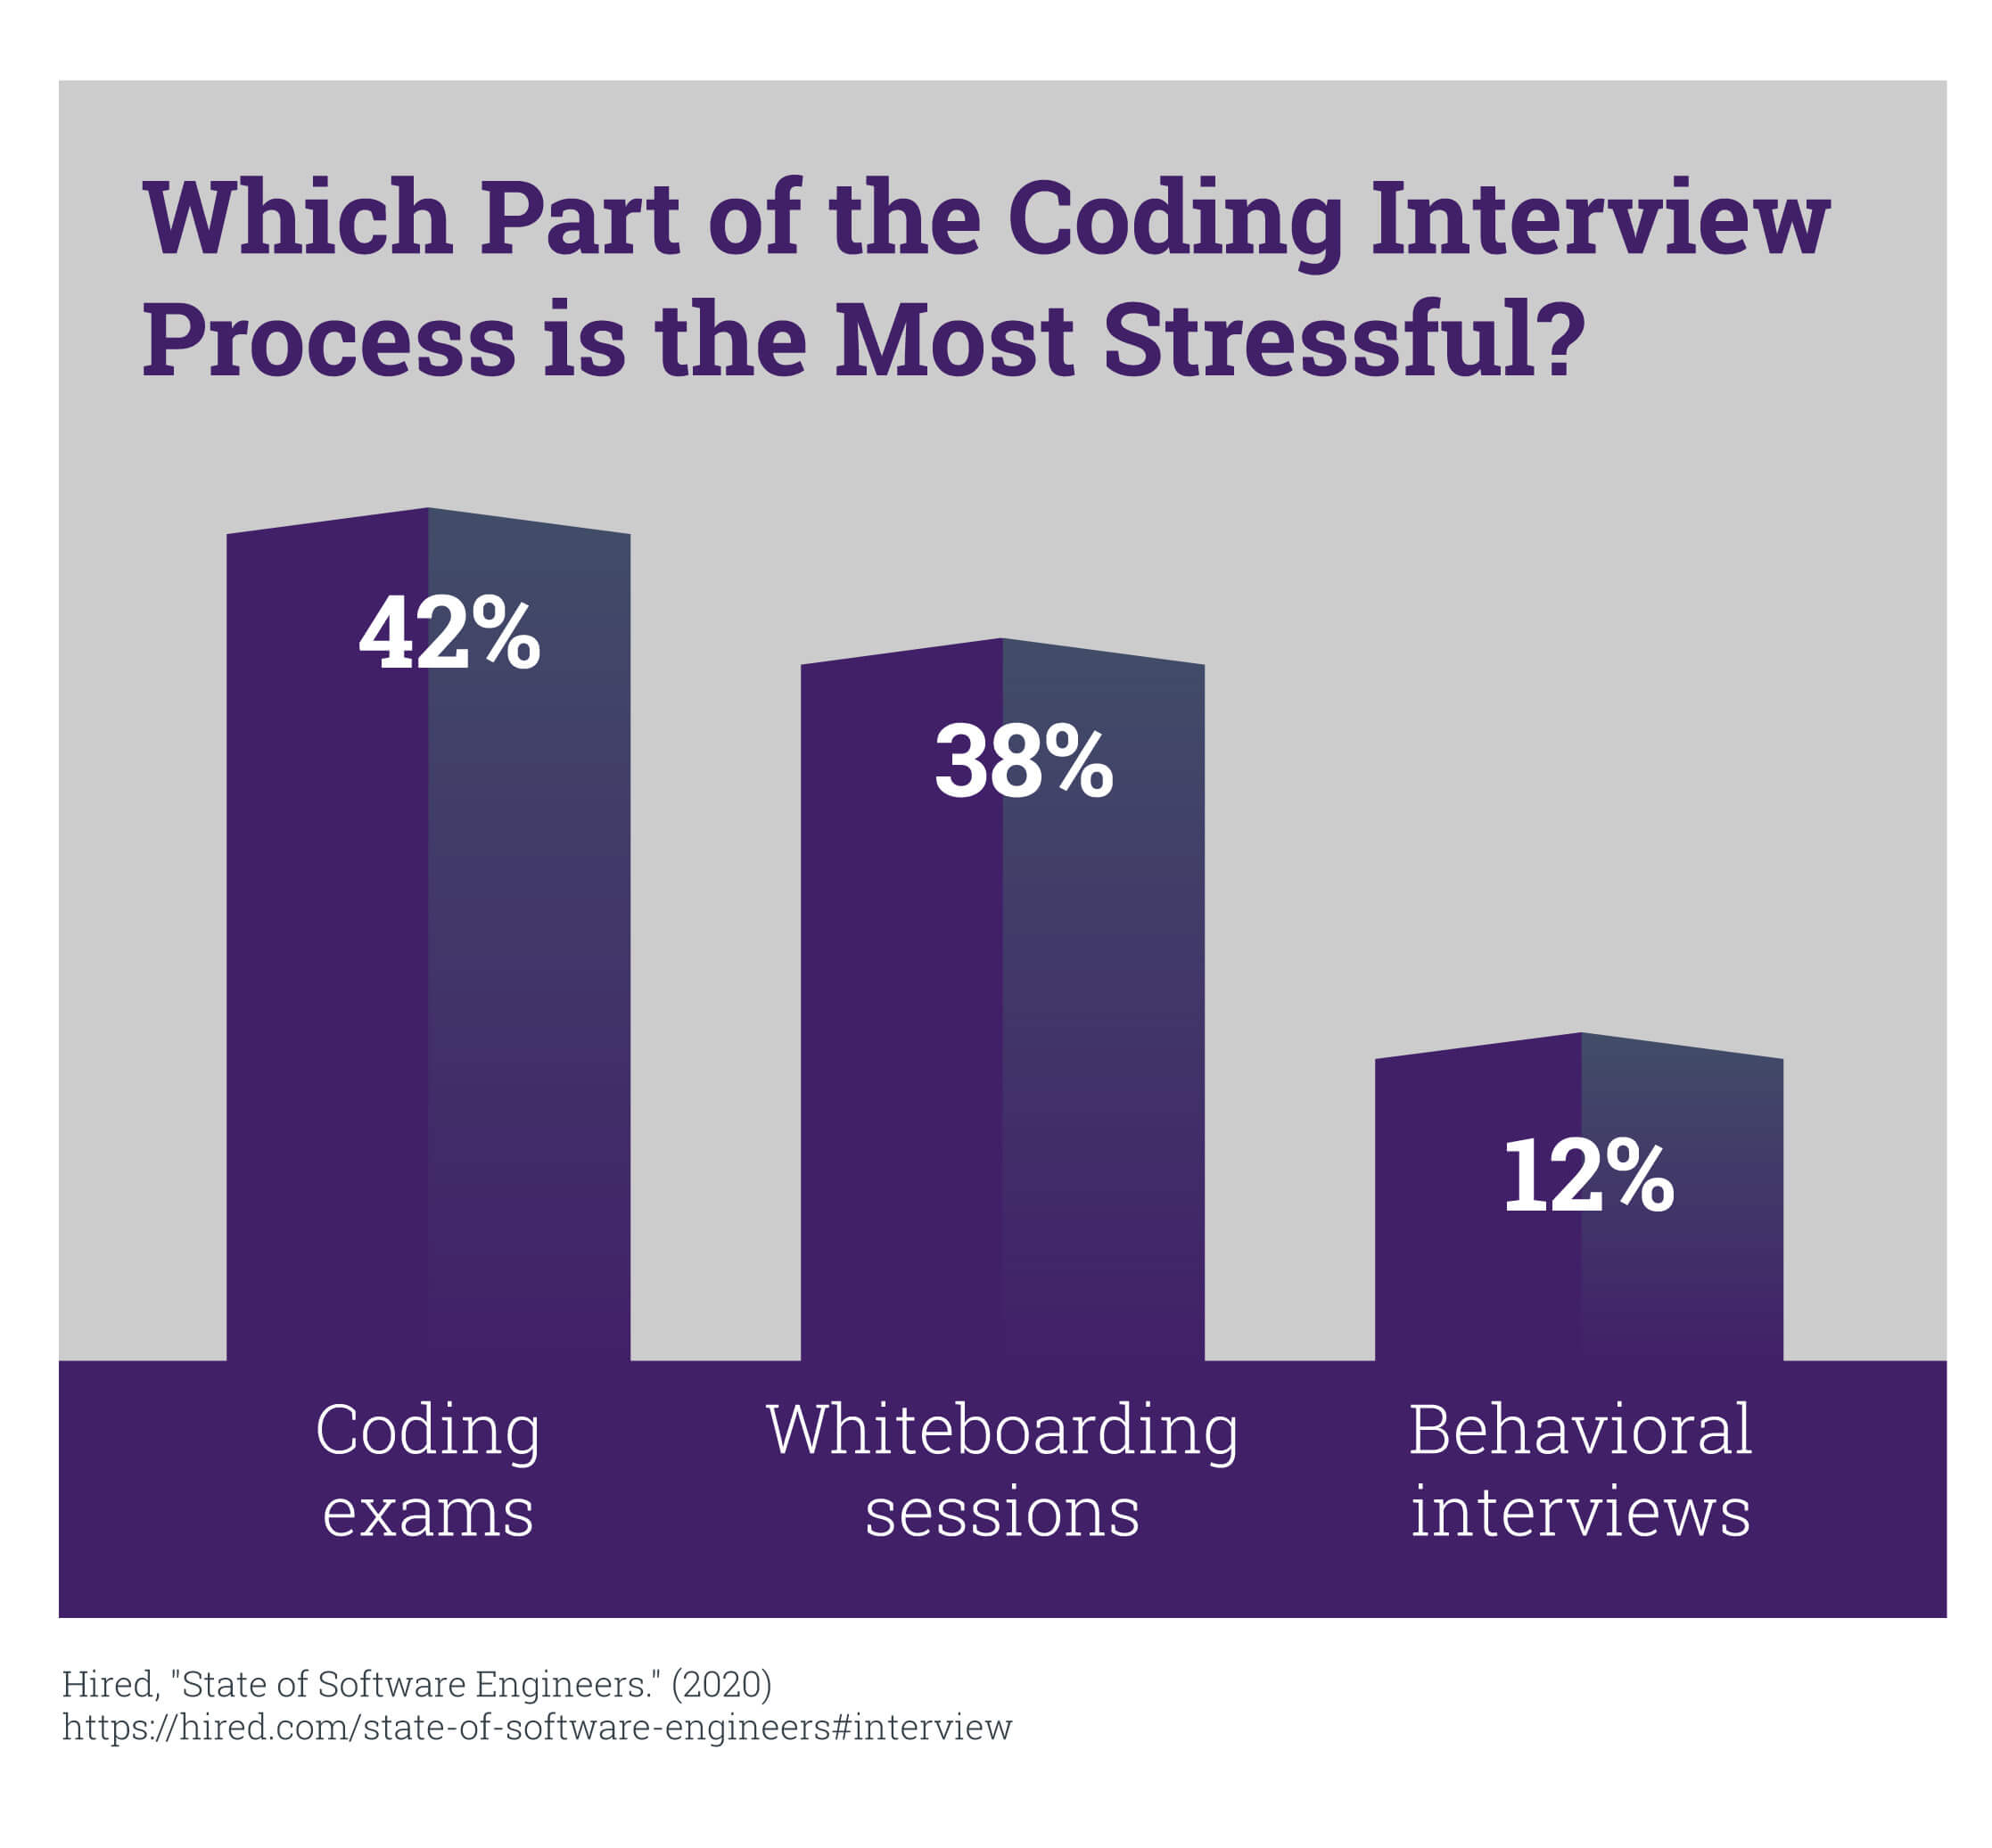 A chart that shows the most stressful part of the coding interview process